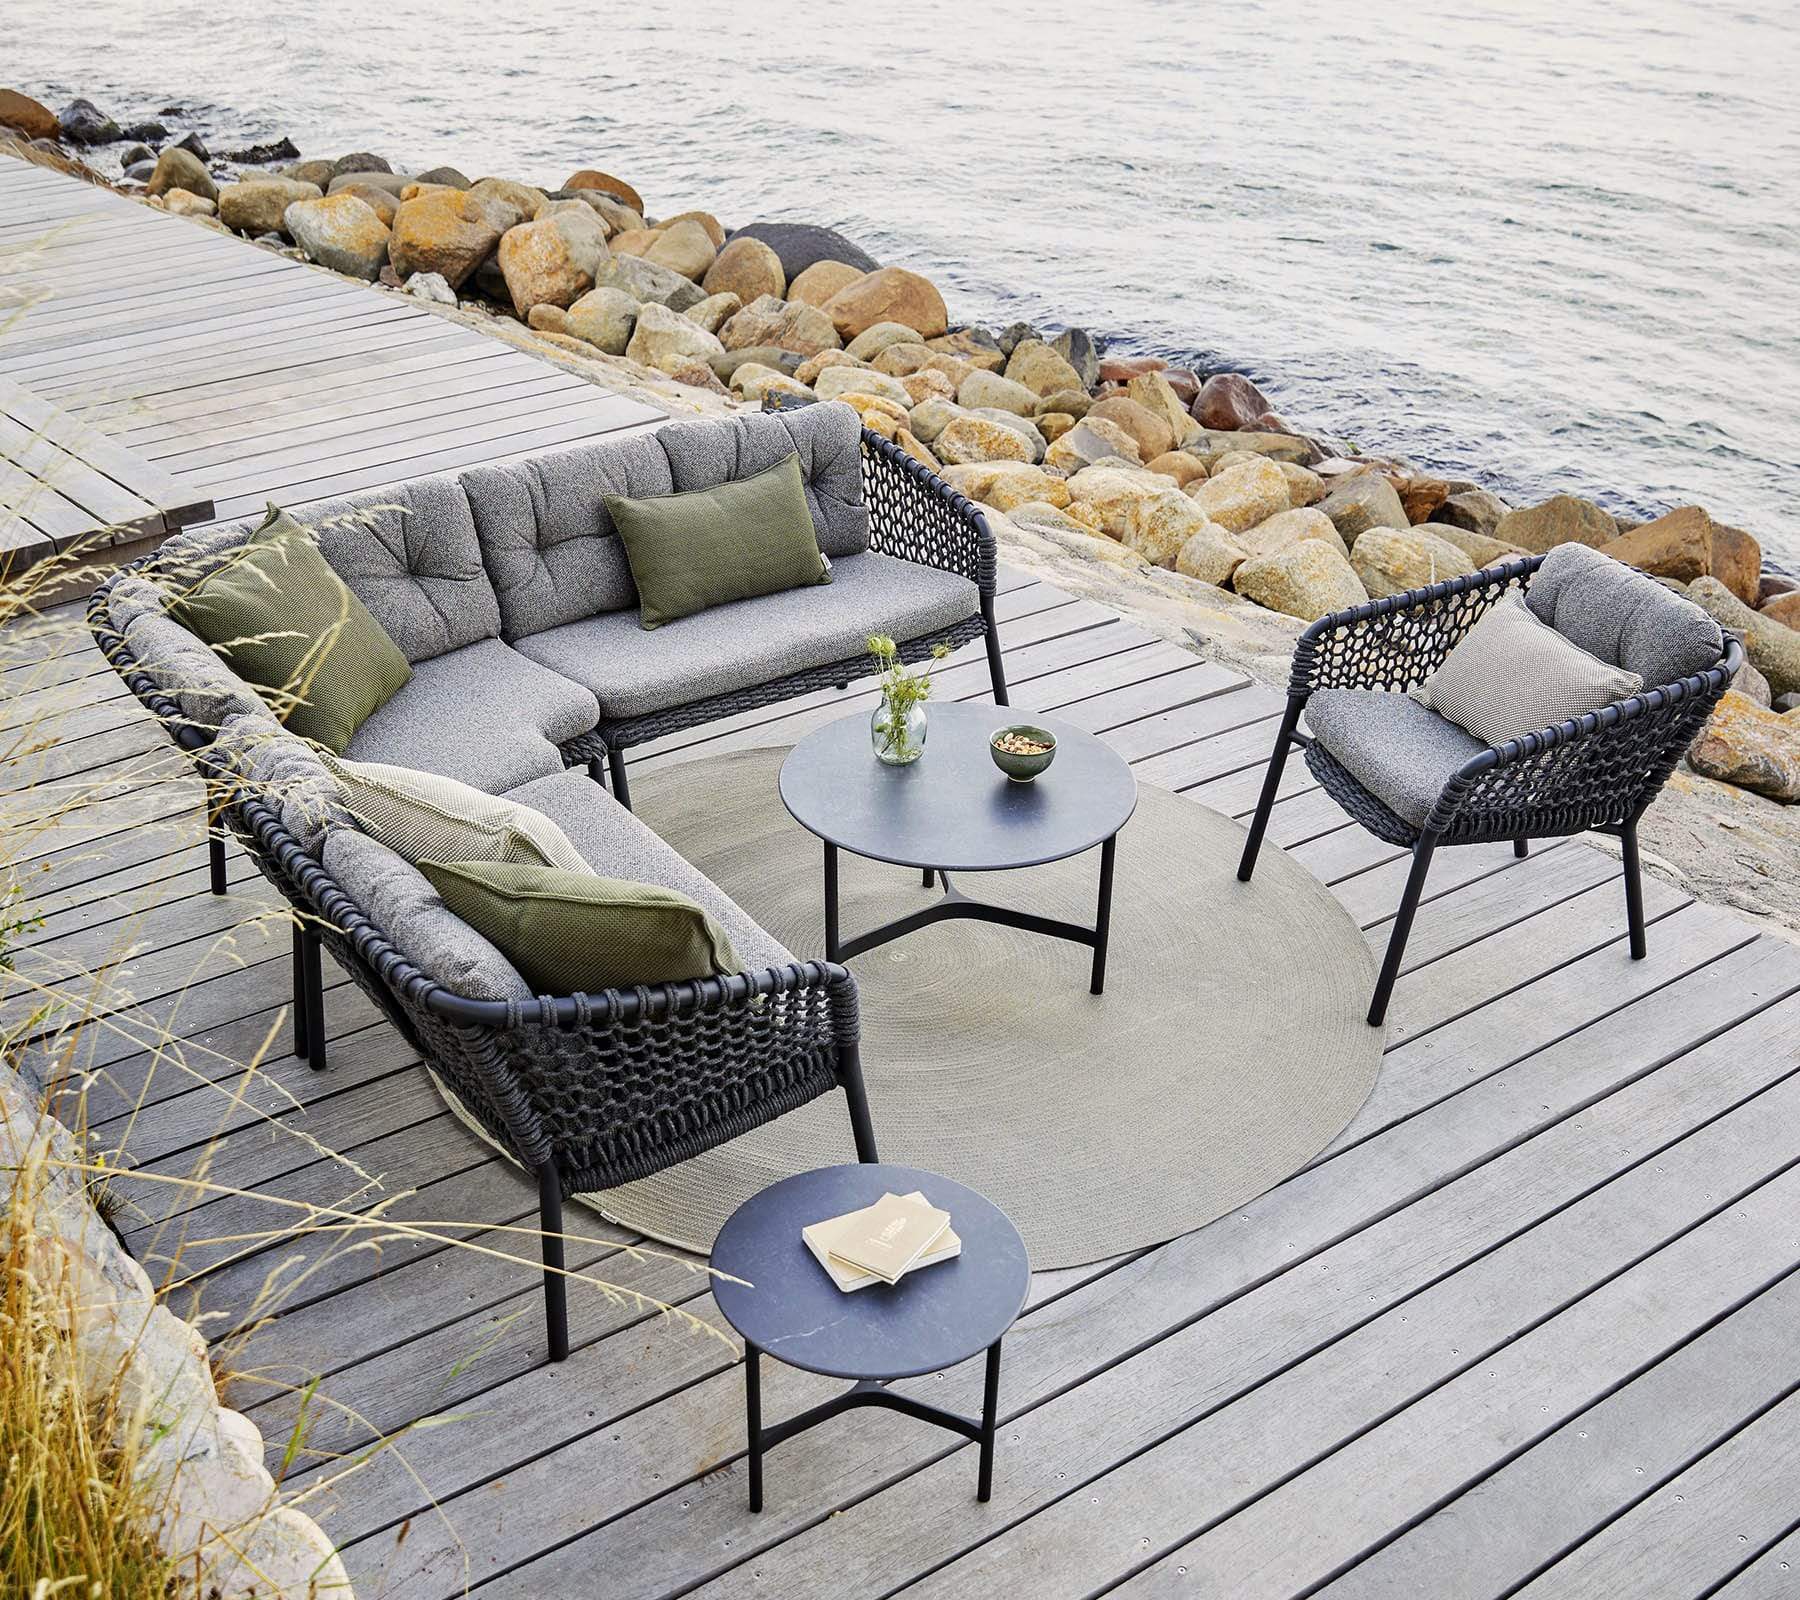 Boxhill's Ocean Outdoor Lounge Chair lifestyle image with Ocean Module Sofa and 2 round table on wooden platform beside rocky seashore